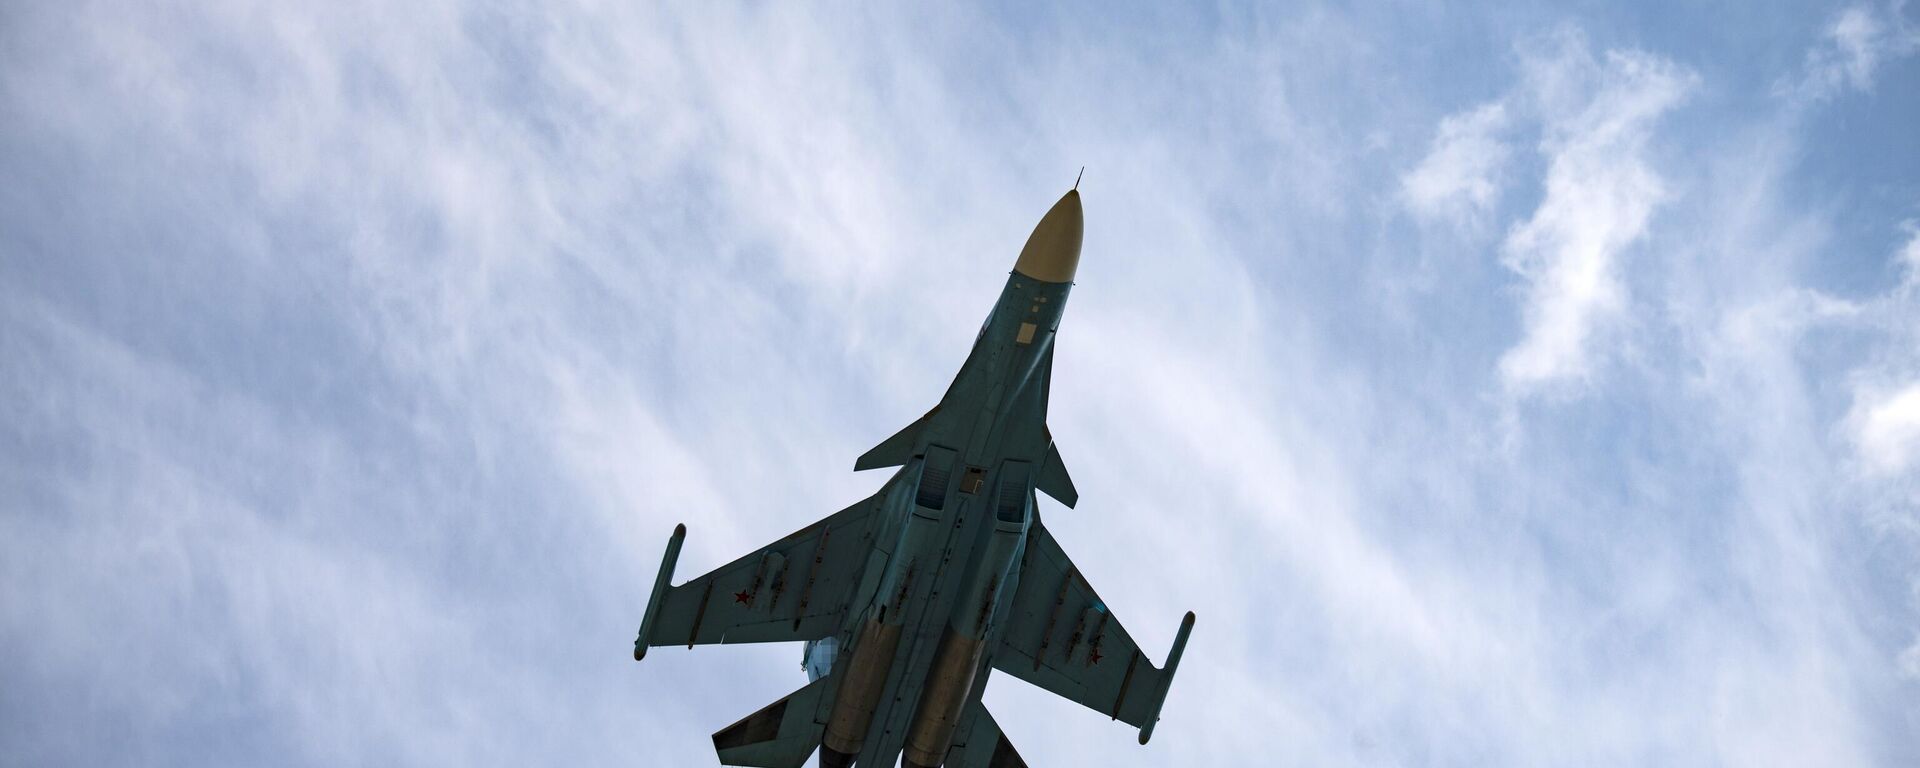 A Russian Sukhoi Su-34 fighter jet flies in the course of Russia's military operation in Ukraine, at the unknown location. - Sputnik International, 1920, 15.09.2023